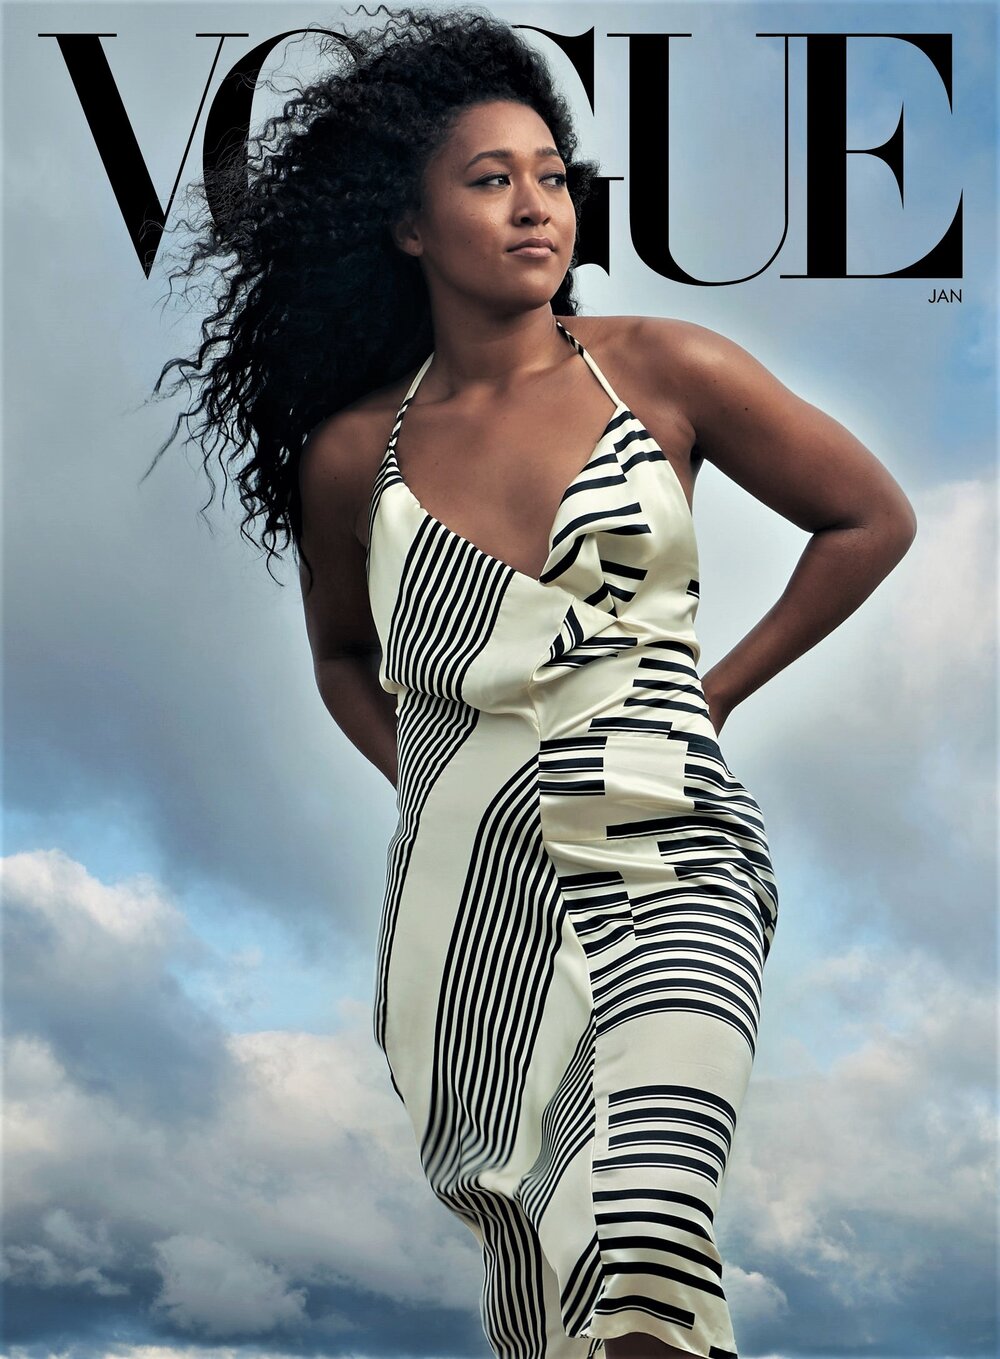 Naomi Osaka, Justice Activist, by Annie Leibovitz for Vogue US January 2021 — Anne of Carversville